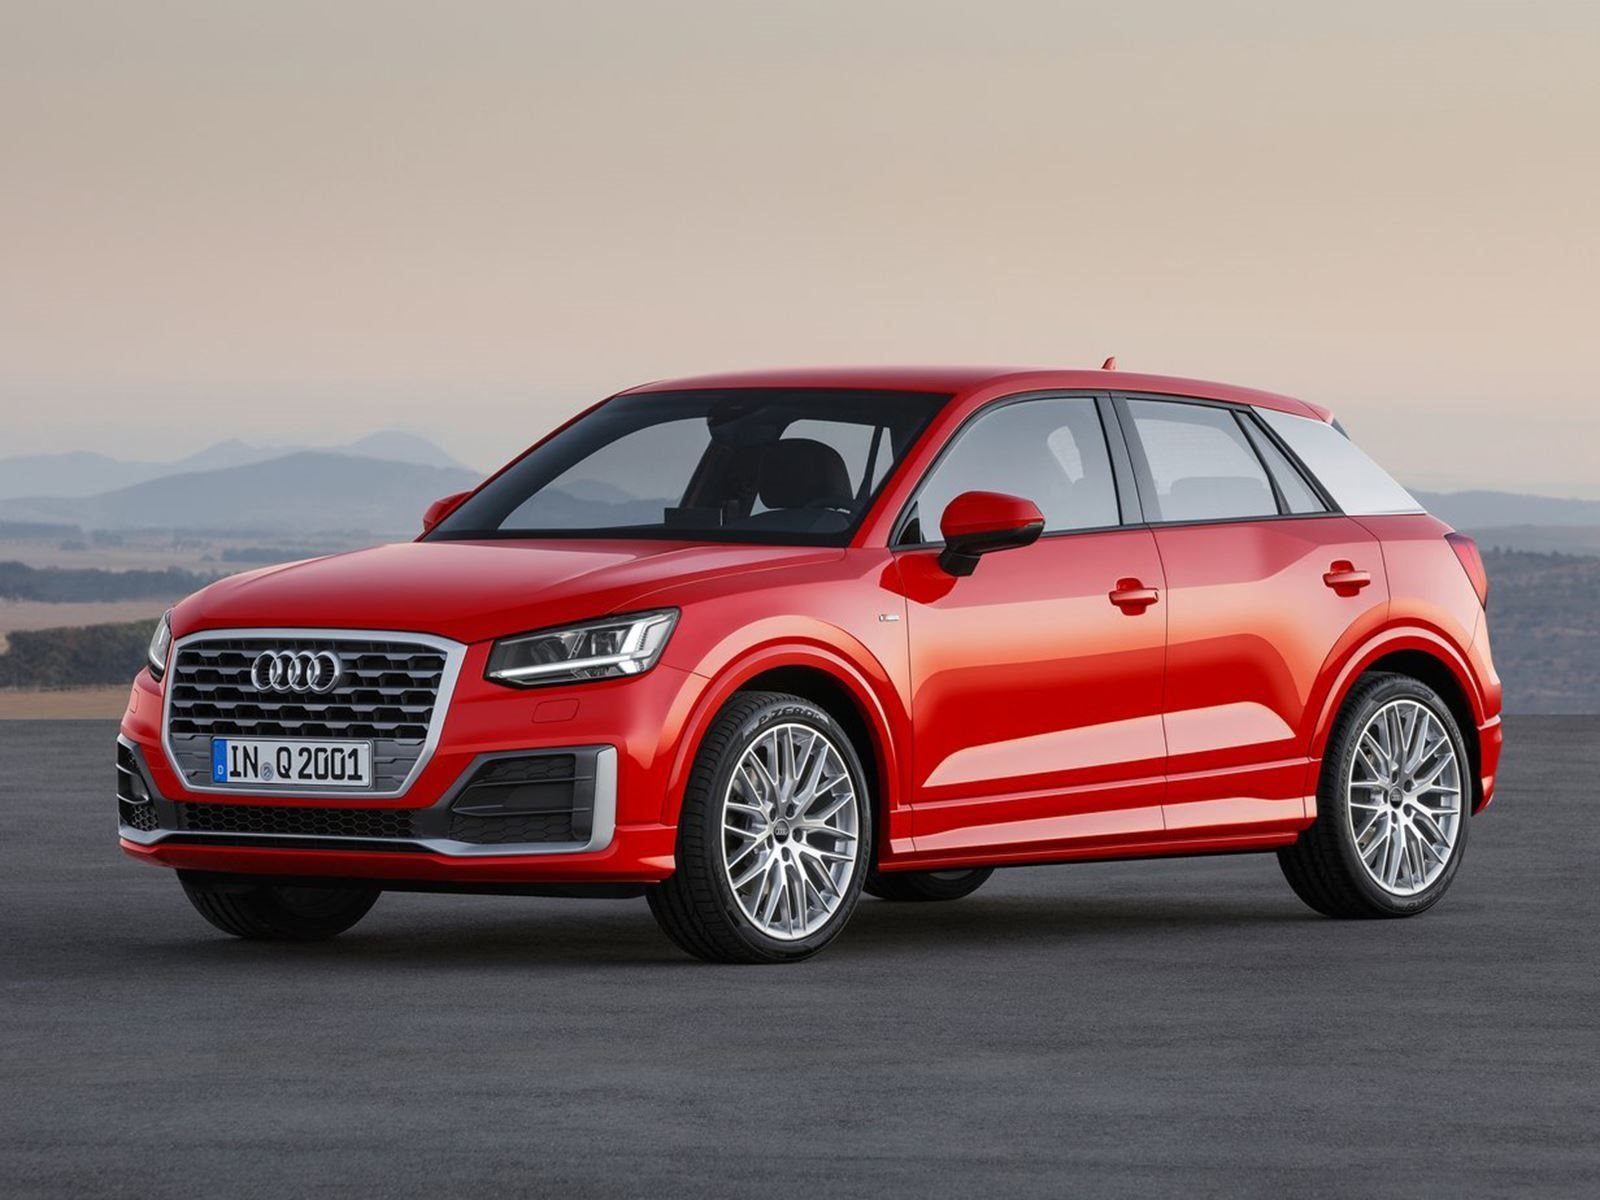 EntryLevel Audi Q1 Crossover Expected To Arrive In 2020 CarBuzz